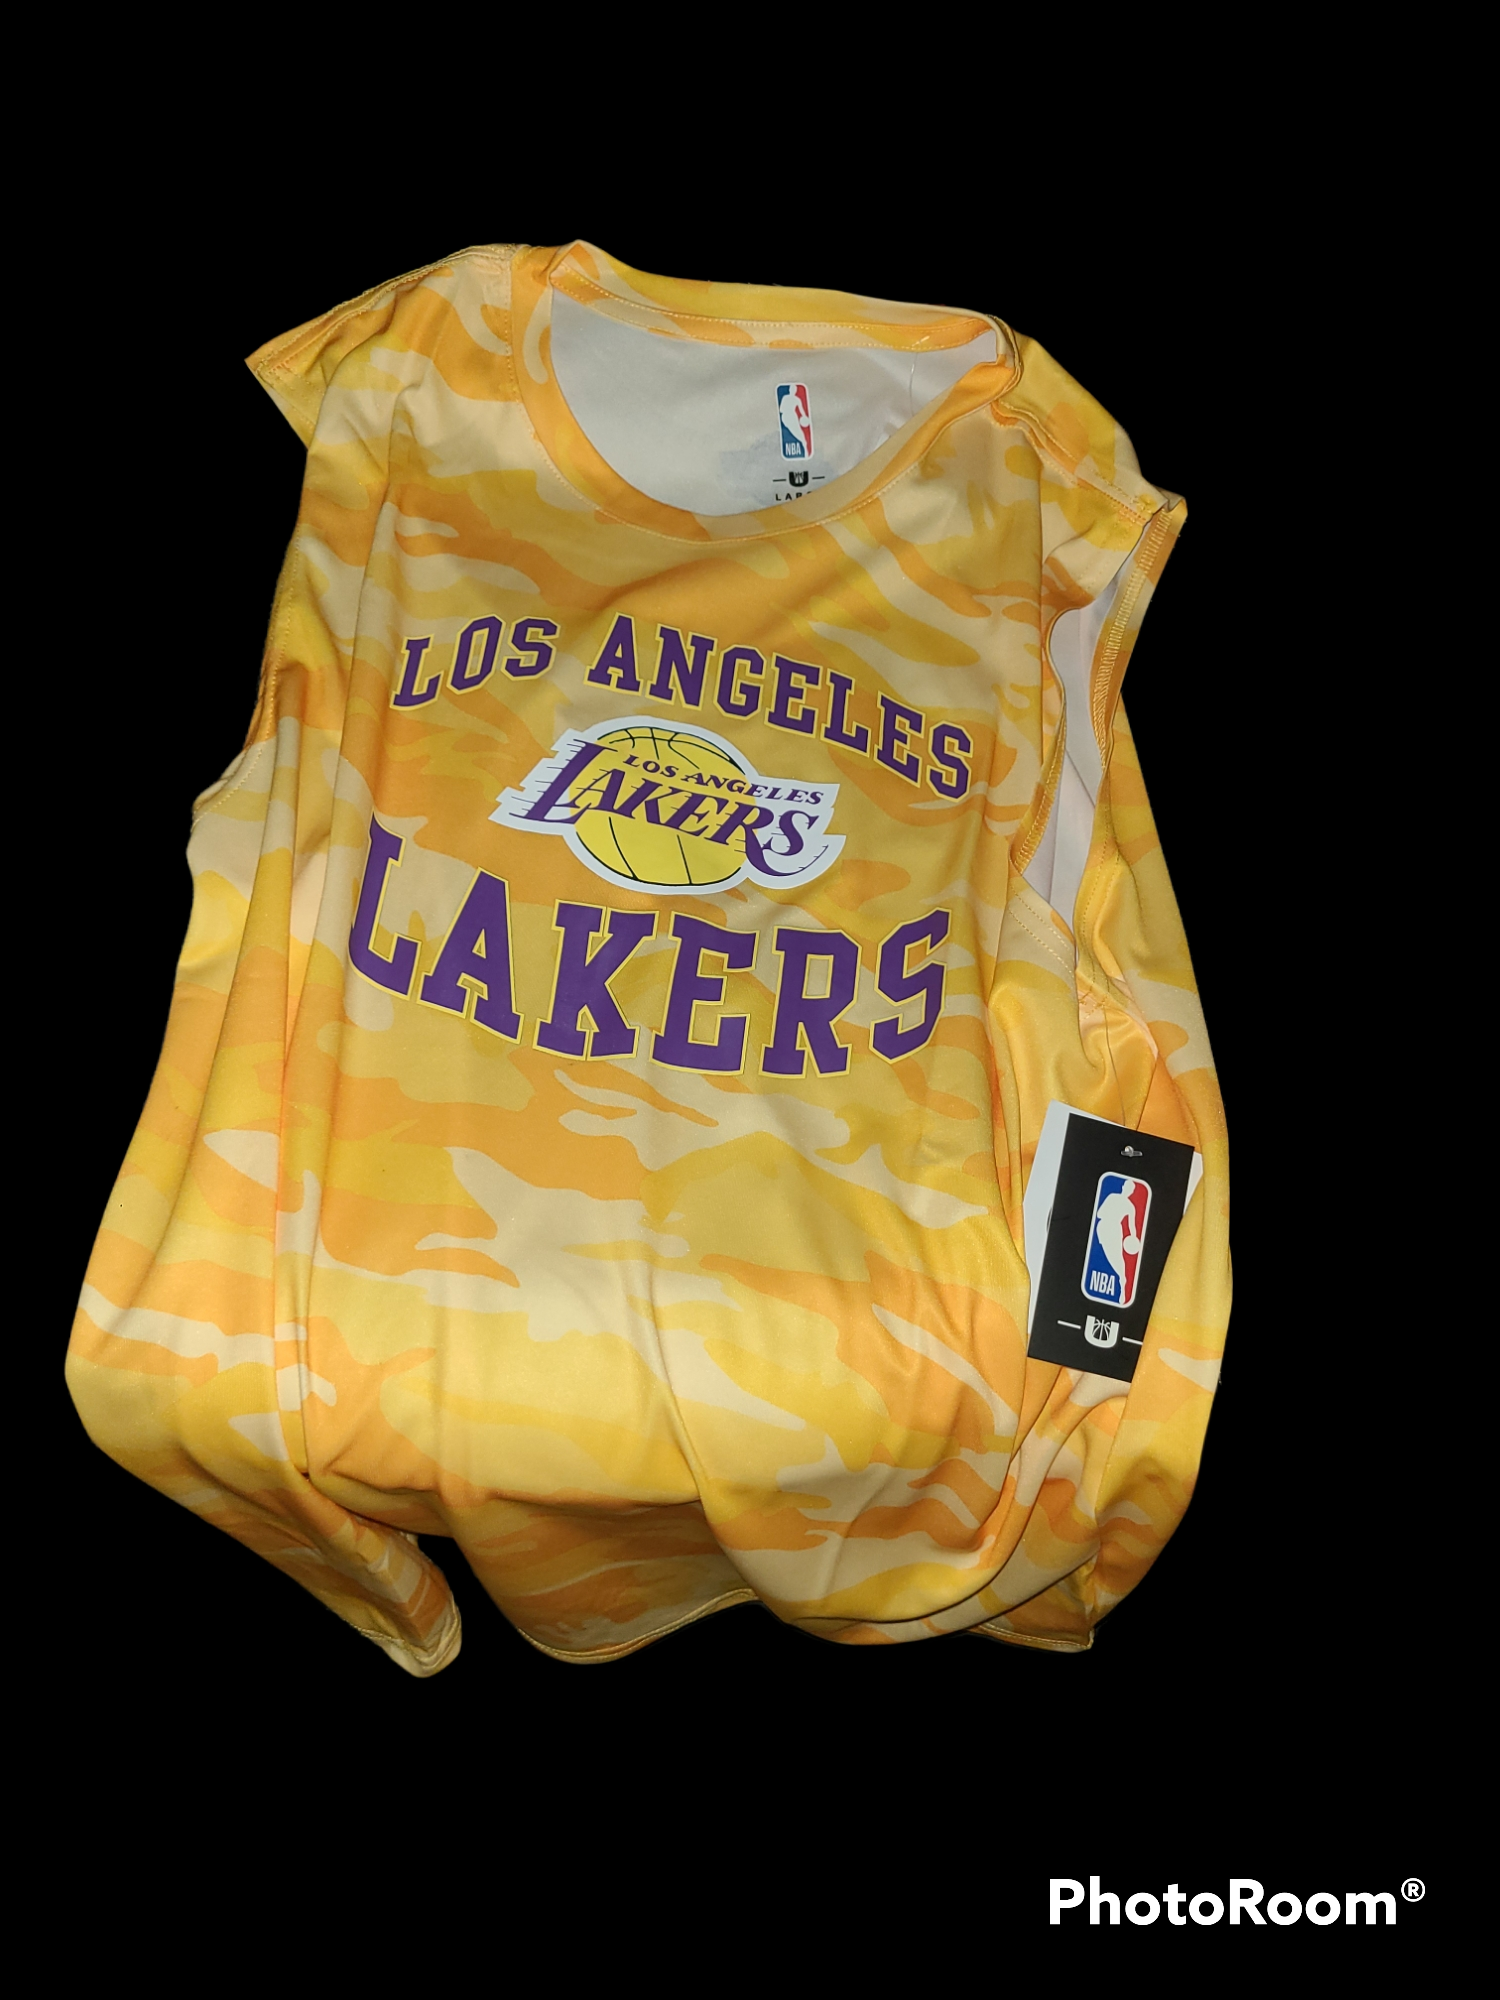 LA LAKERS LEBRON JAMES #6 STITCHED JERSEY for Sale in Orleans, IA